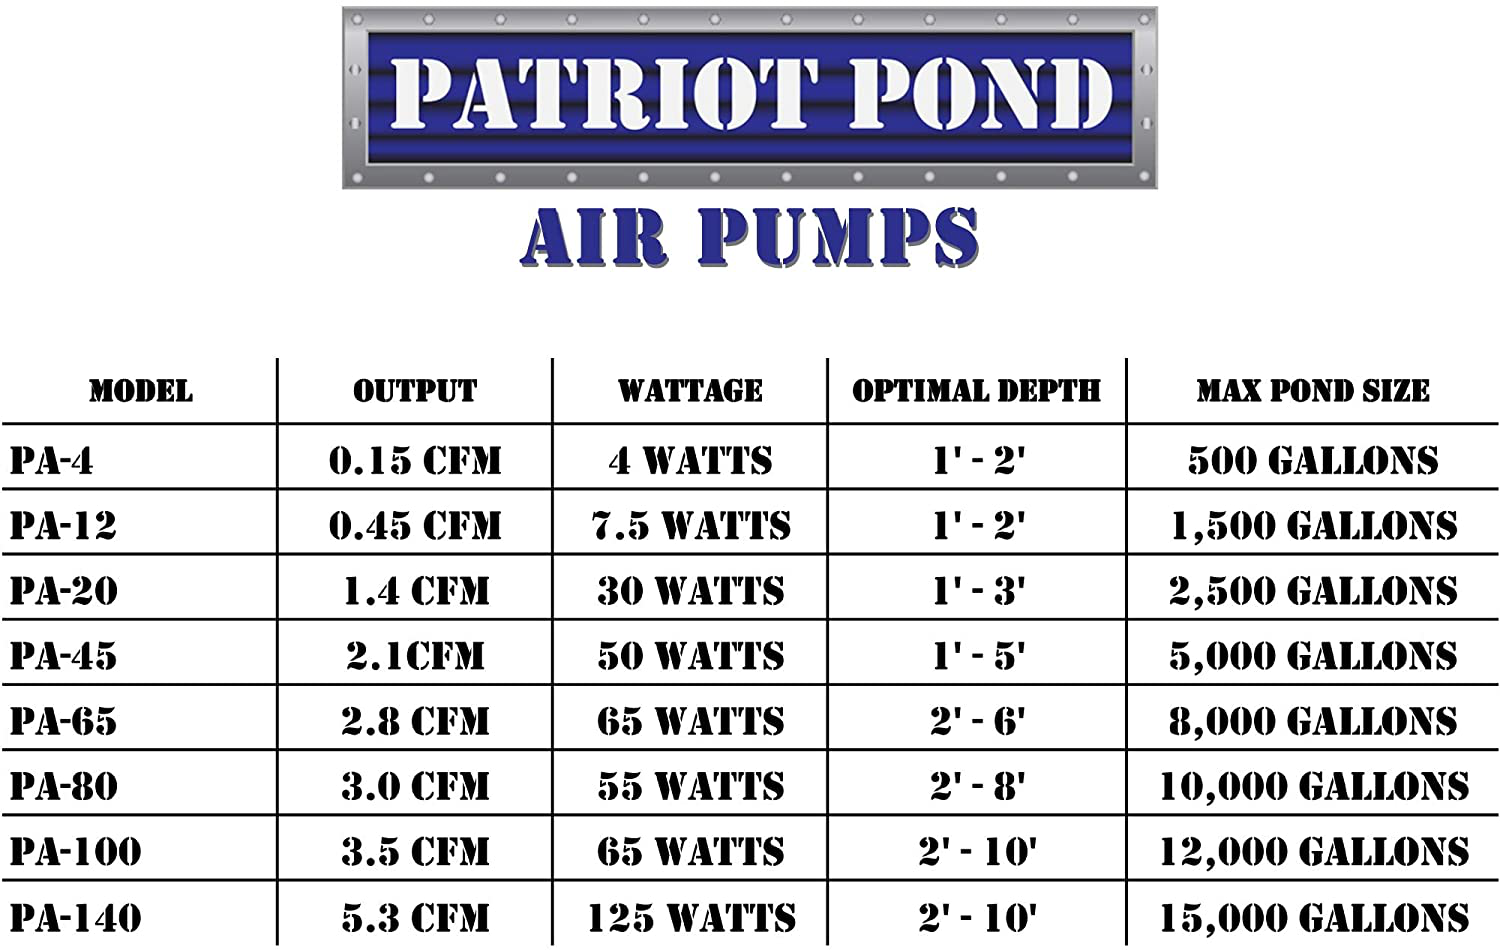 HALF off PONDS Patriot Pond 0.45 Cubic Feet per Minute Air Pump for Aquariums, Tanks, and Ponds to 1,500 Gallons, Water Gardens & Fish Ponds - PA-12 Animals & Pet Supplies > Pet Supplies > Fish Supplies > Aquarium & Pond Tubing HALF OFF PONDS   